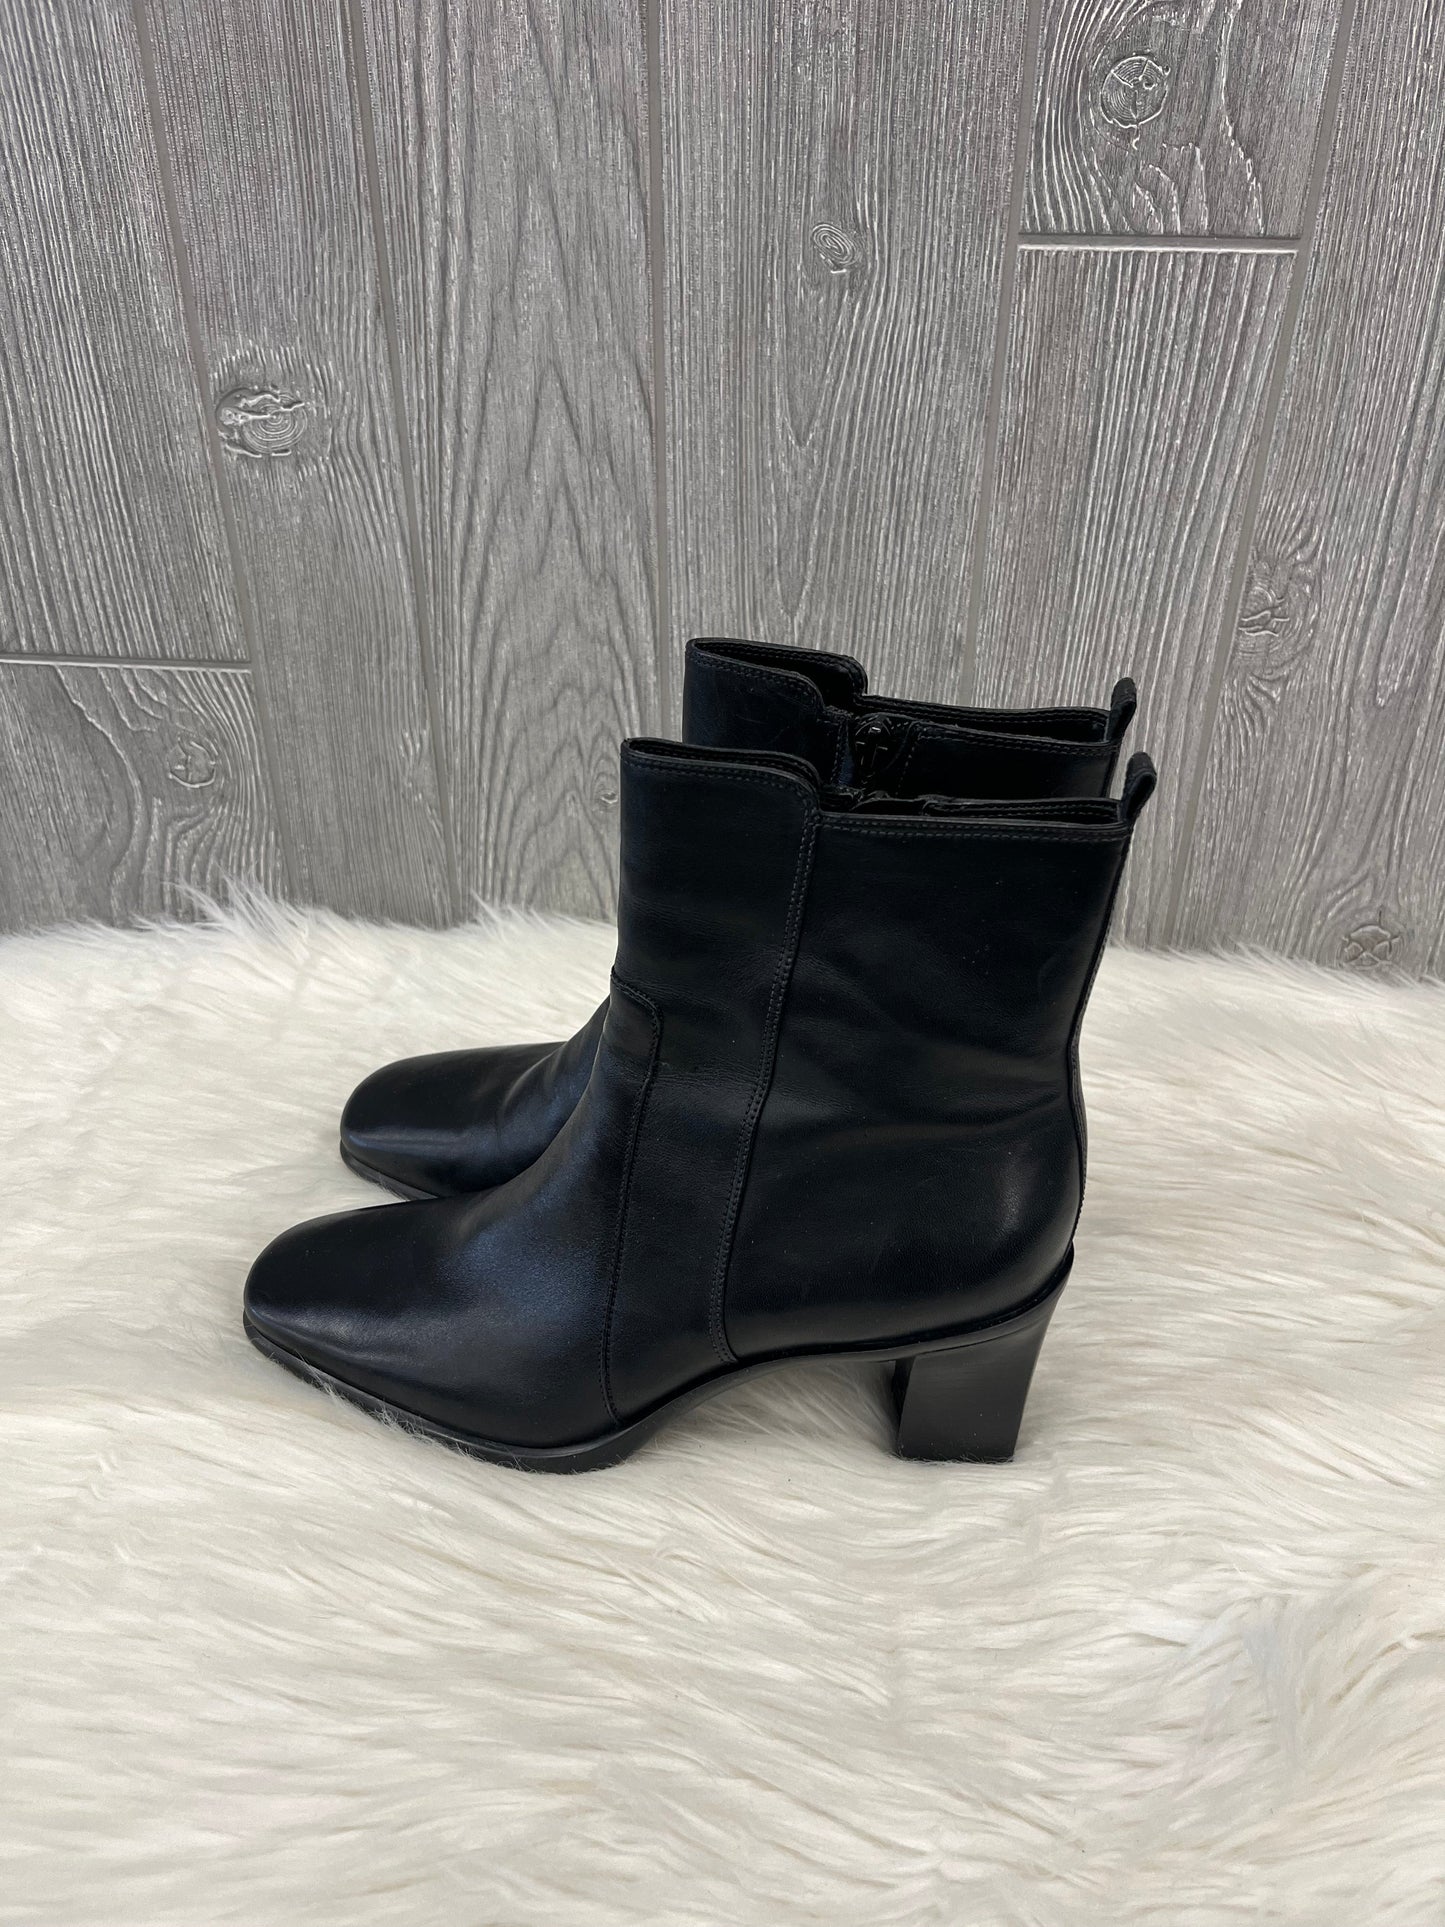 Boots Ankle Heels By Antonio Melani  Size: 8.5